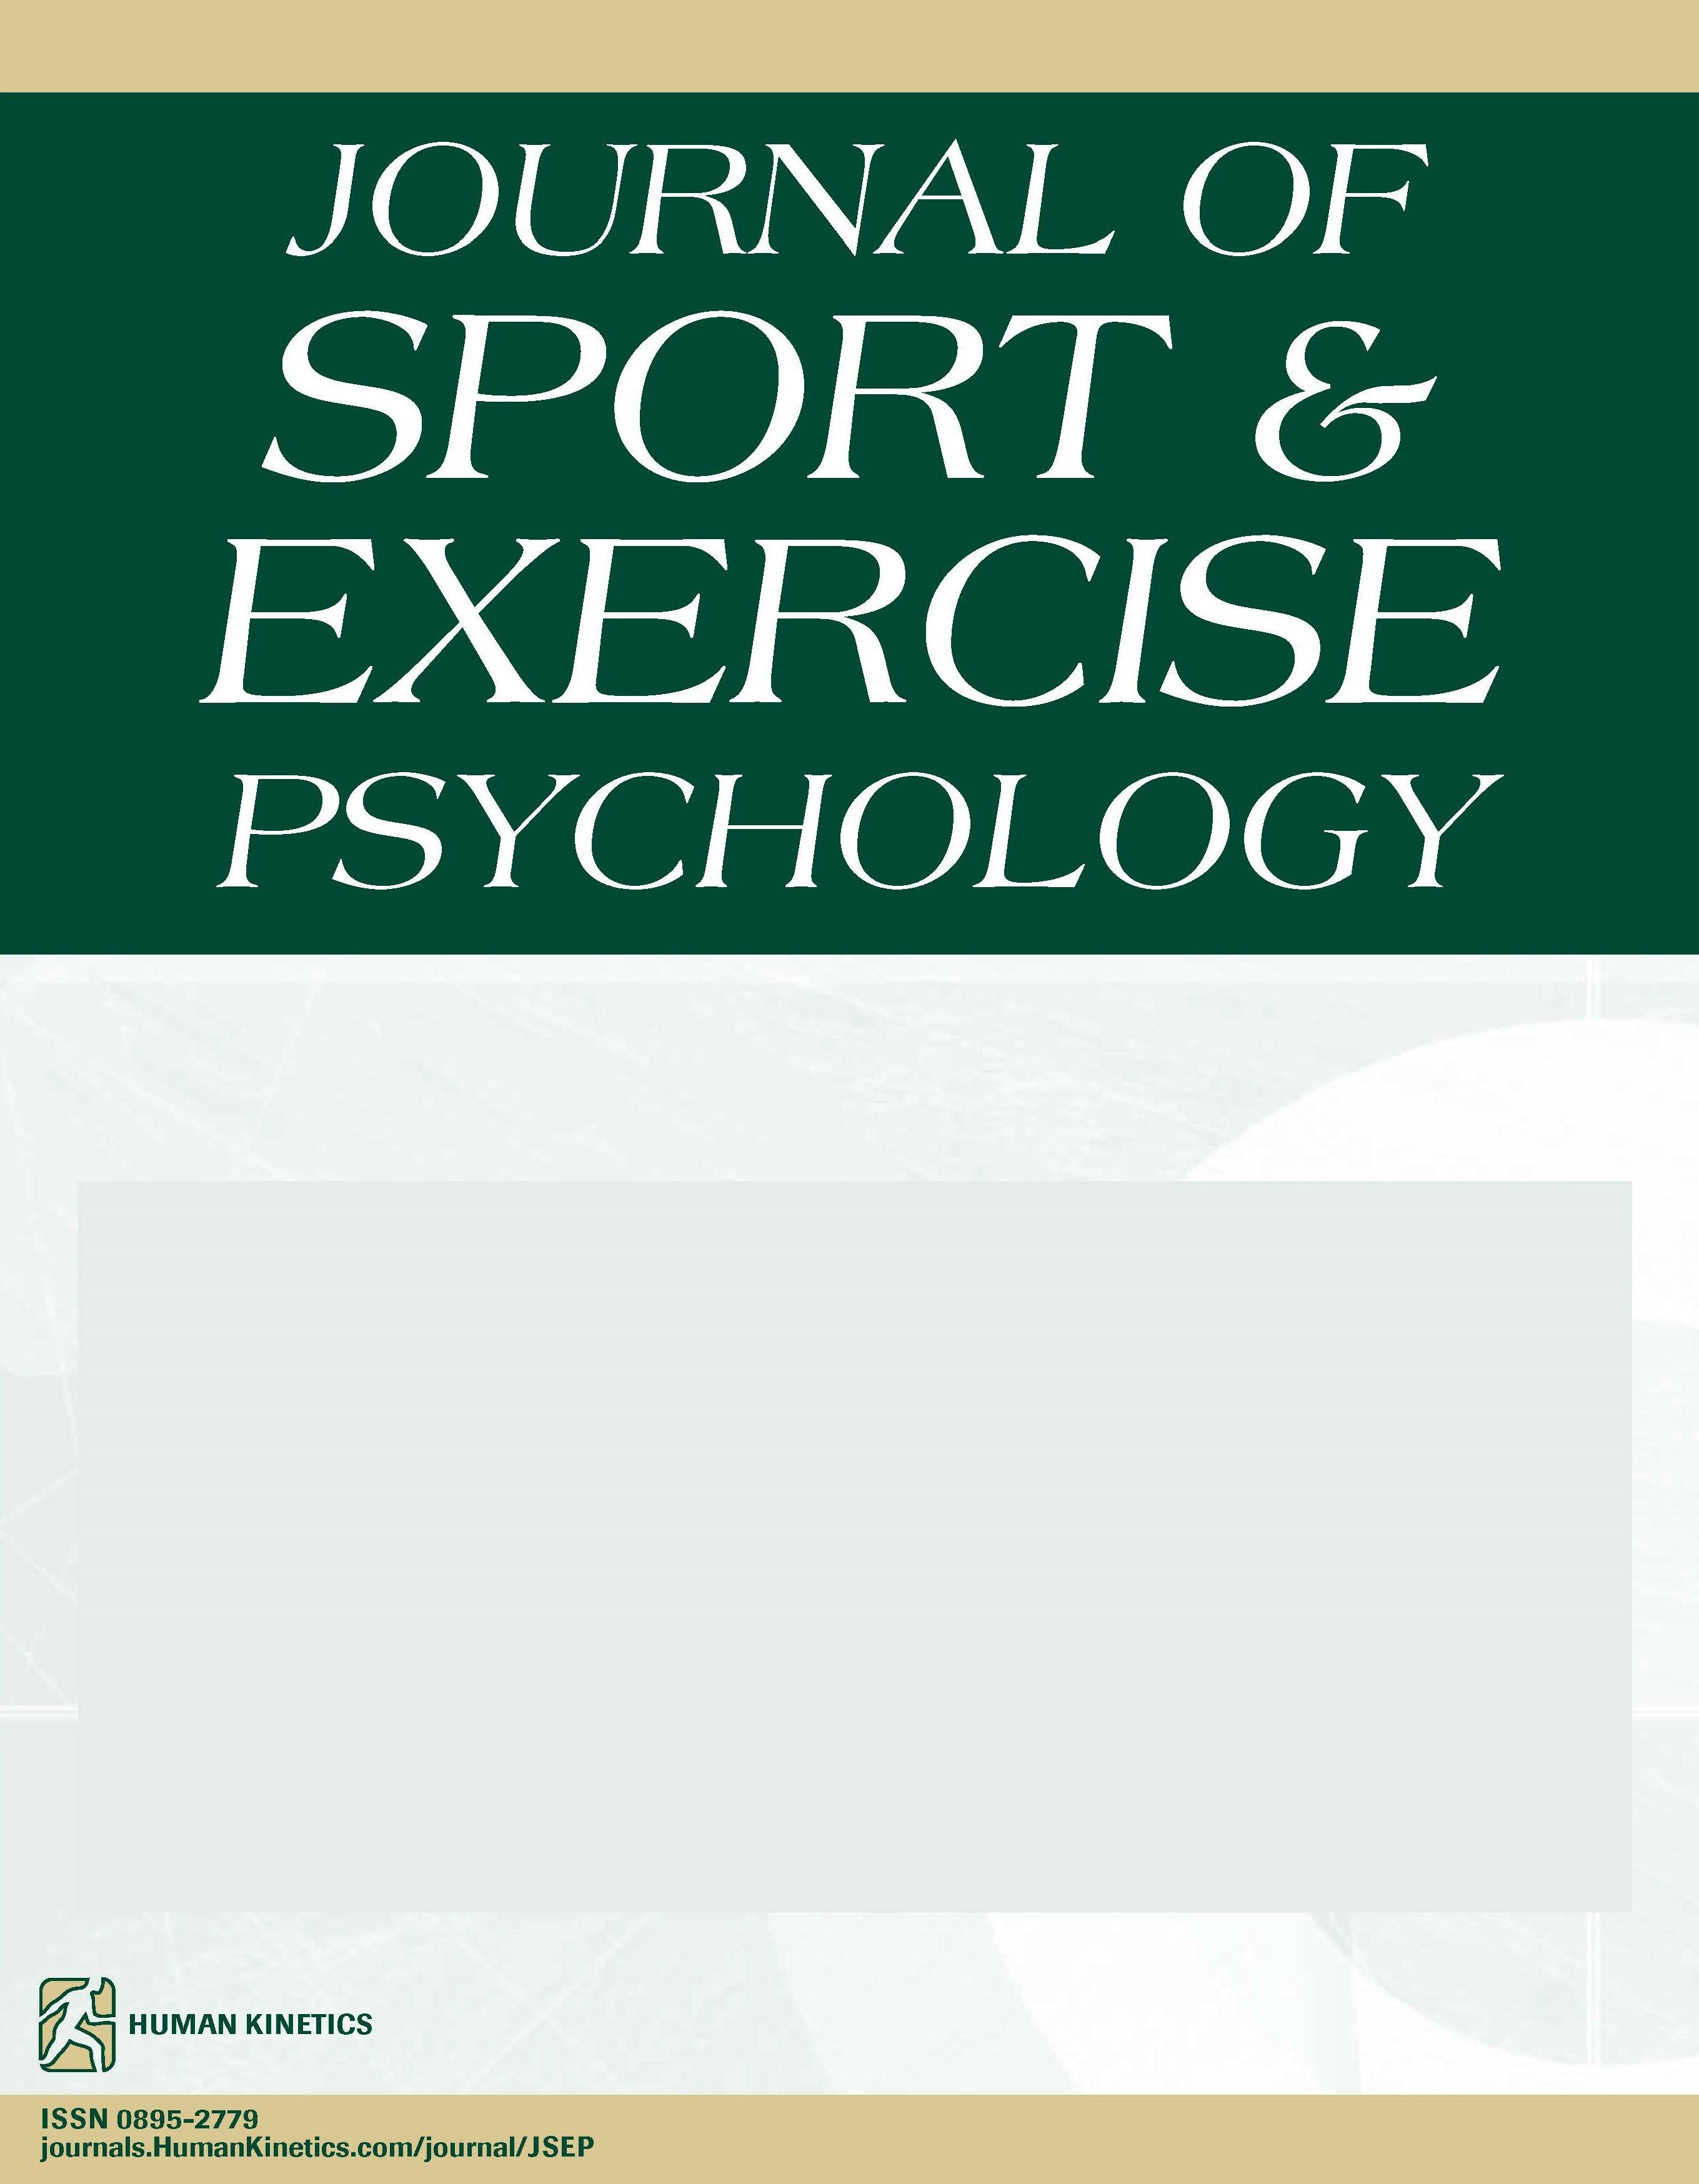 Investigating Intraindividual Variability of Psychological Needs Satisfaction and Relations With Subsequent Physical Activity